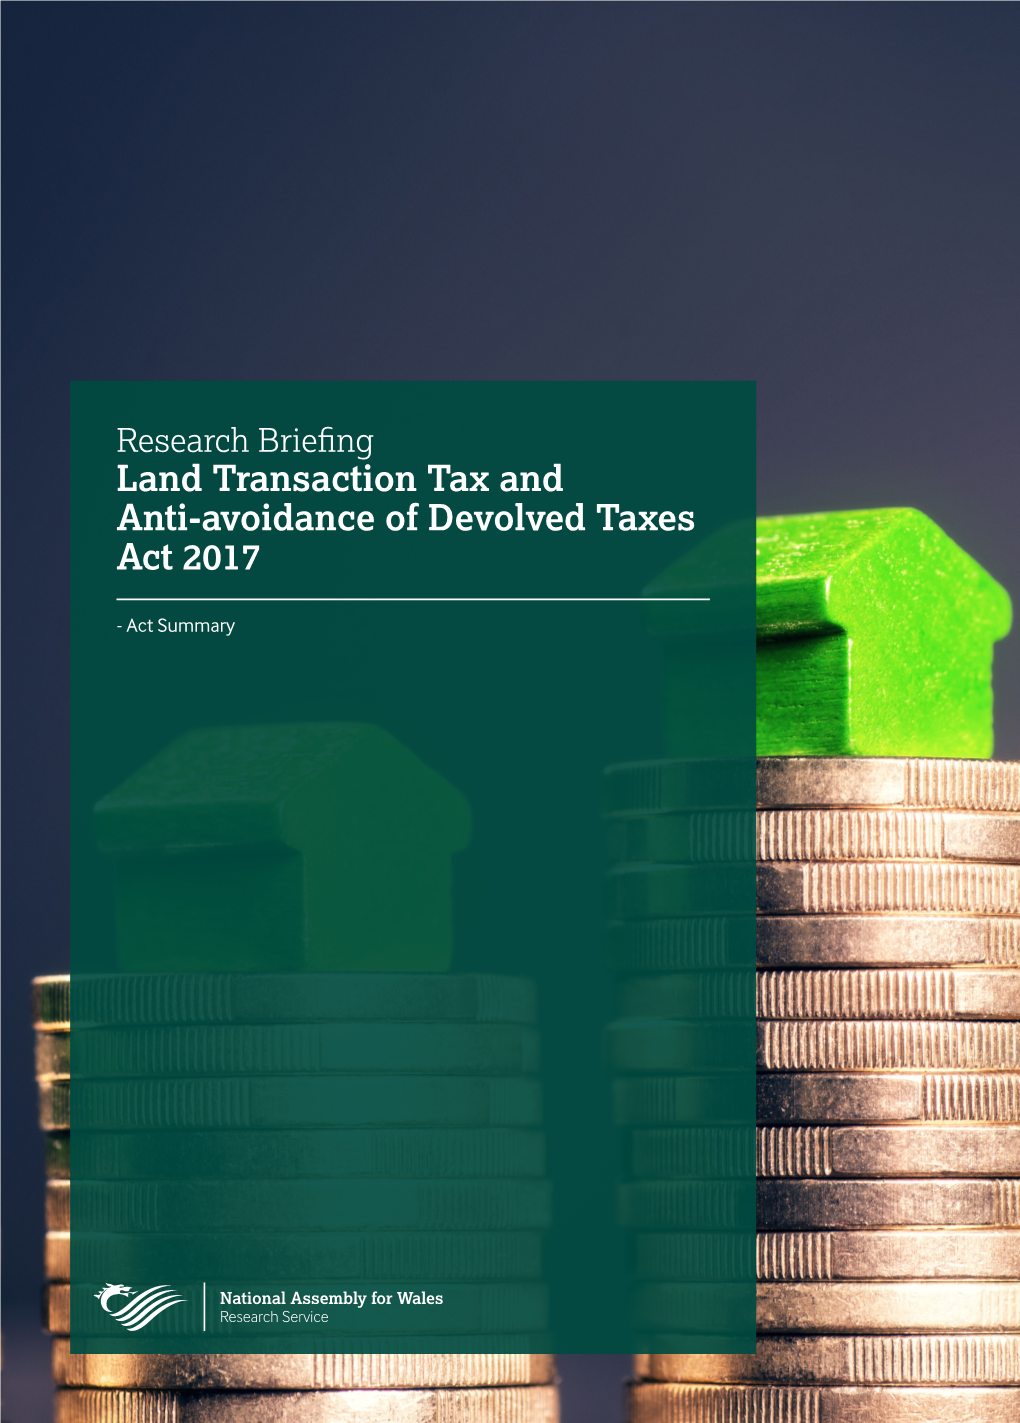 Land Transaction Tax and Anti-Avoidance of Devolved Taxes Act 2017